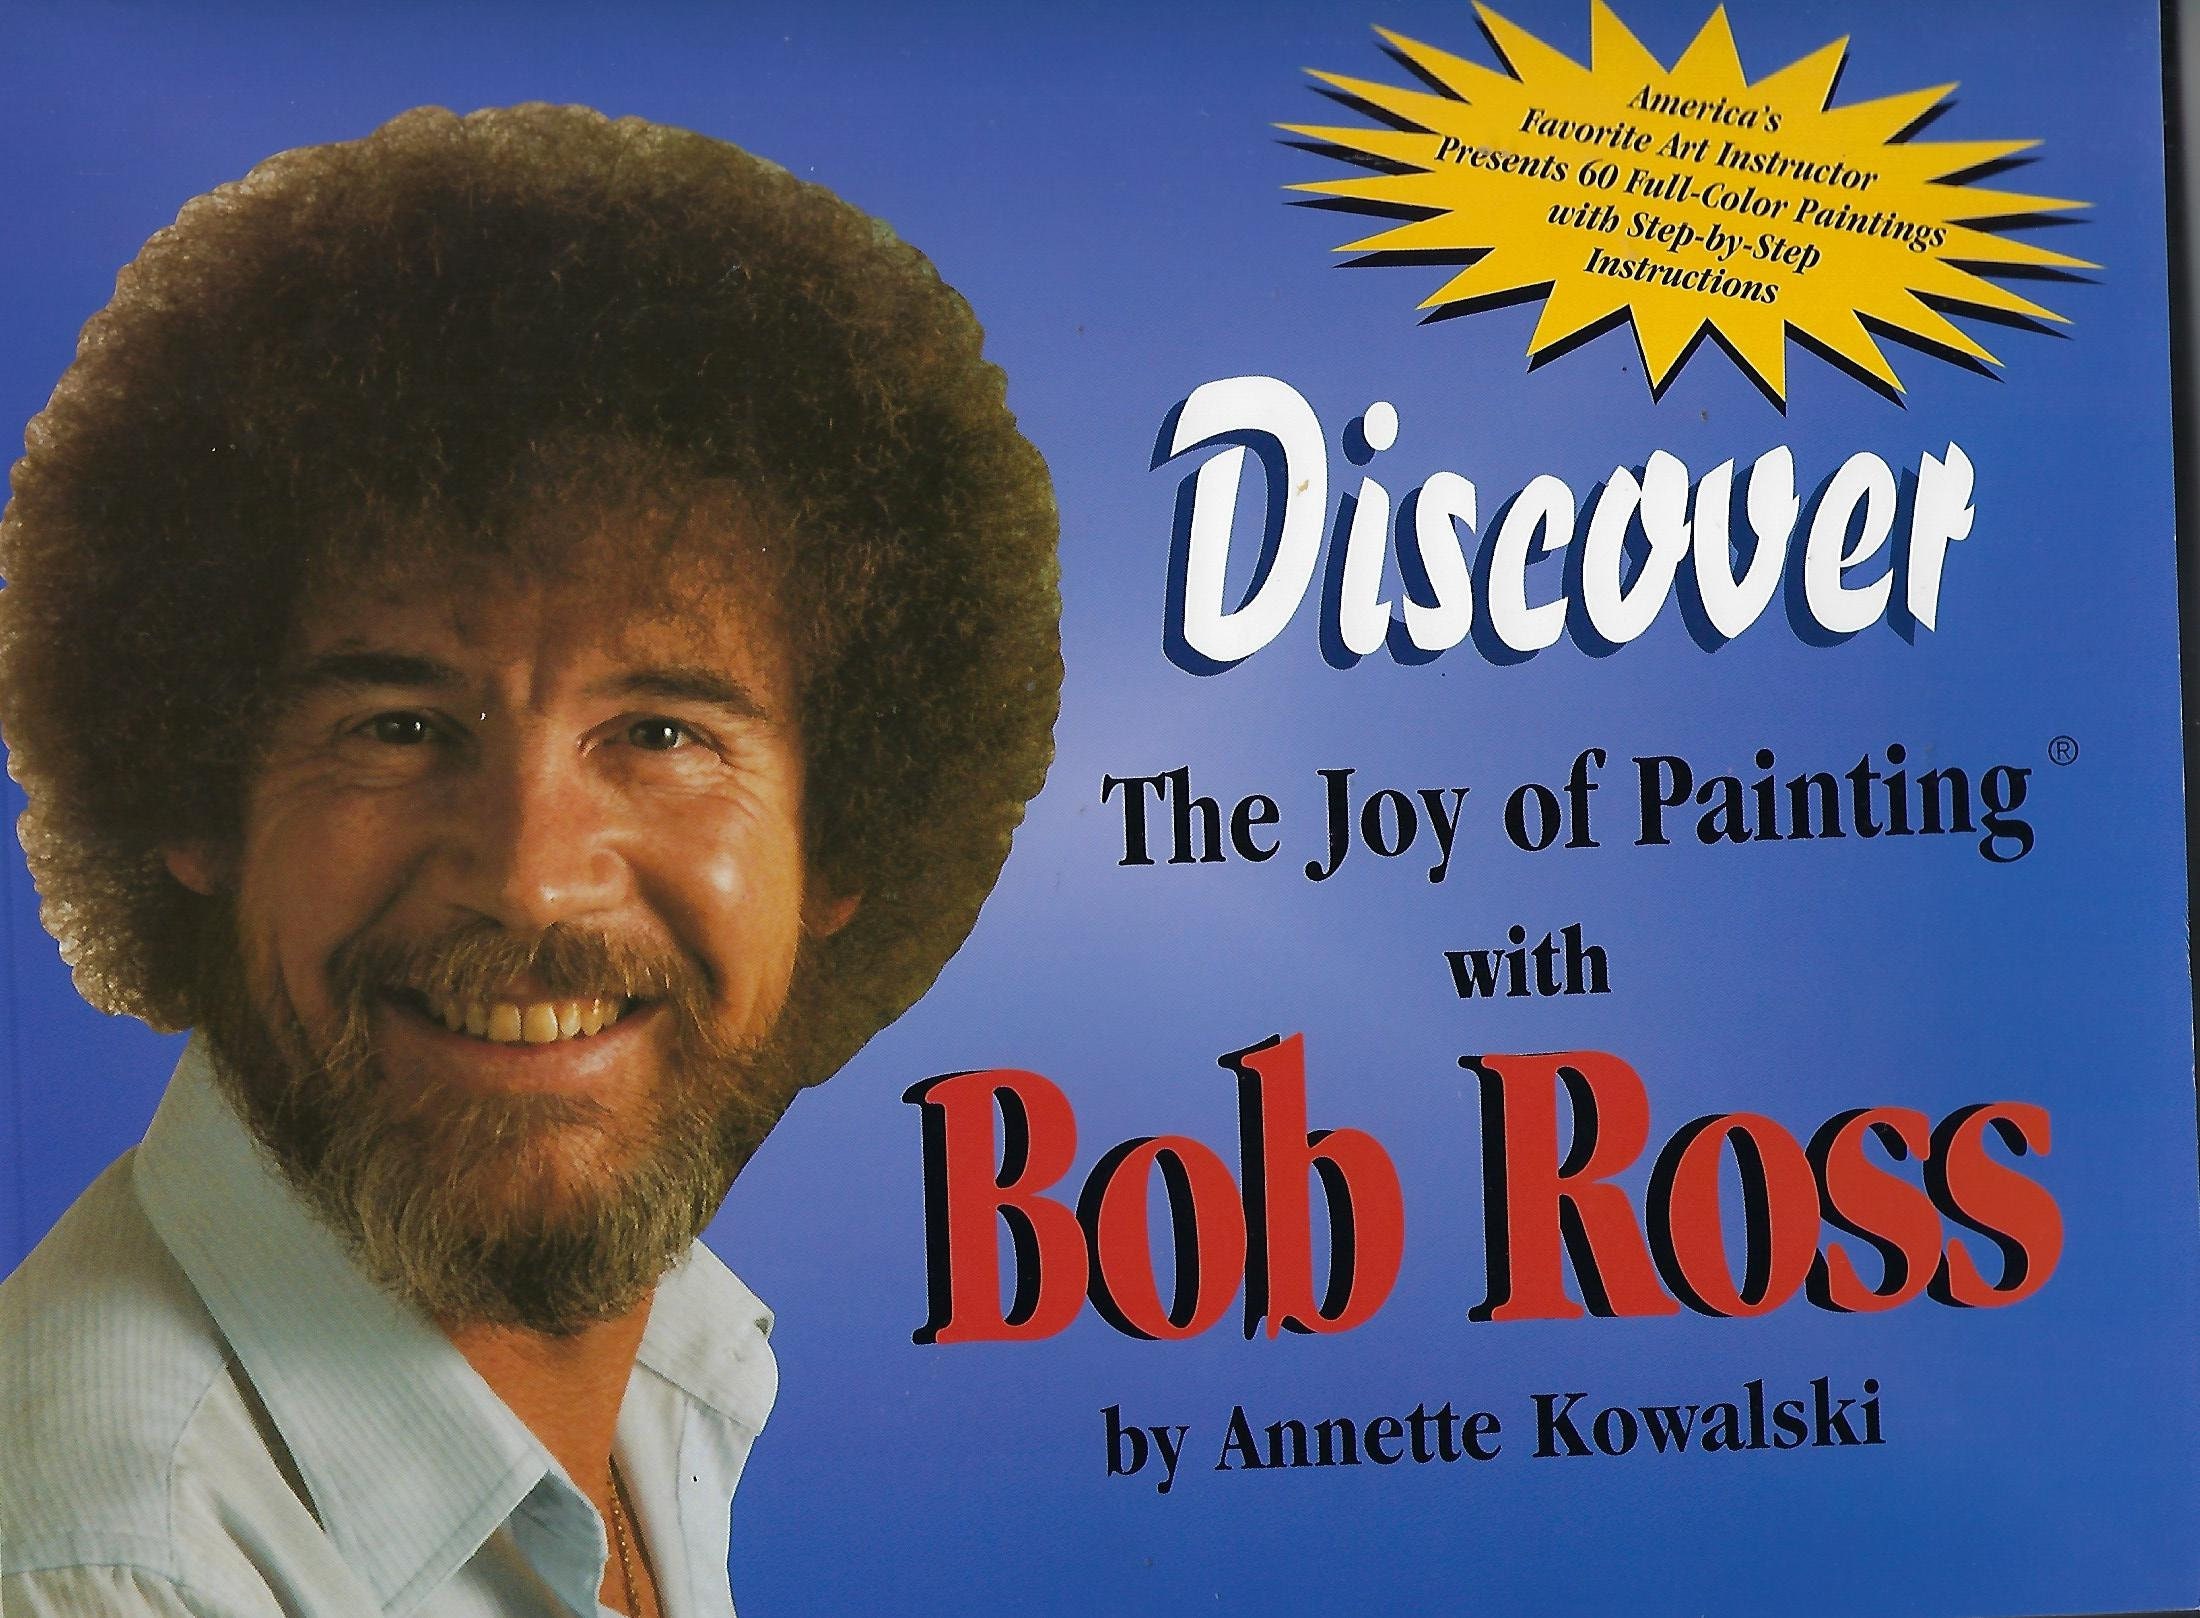 Bob Ross Bobblehead With Sound, 4 Figurine, Flip Book, 30 Works, Paint by  No Kit, 3 Canvases, Paint Brush Easel, Instructions and Tips 